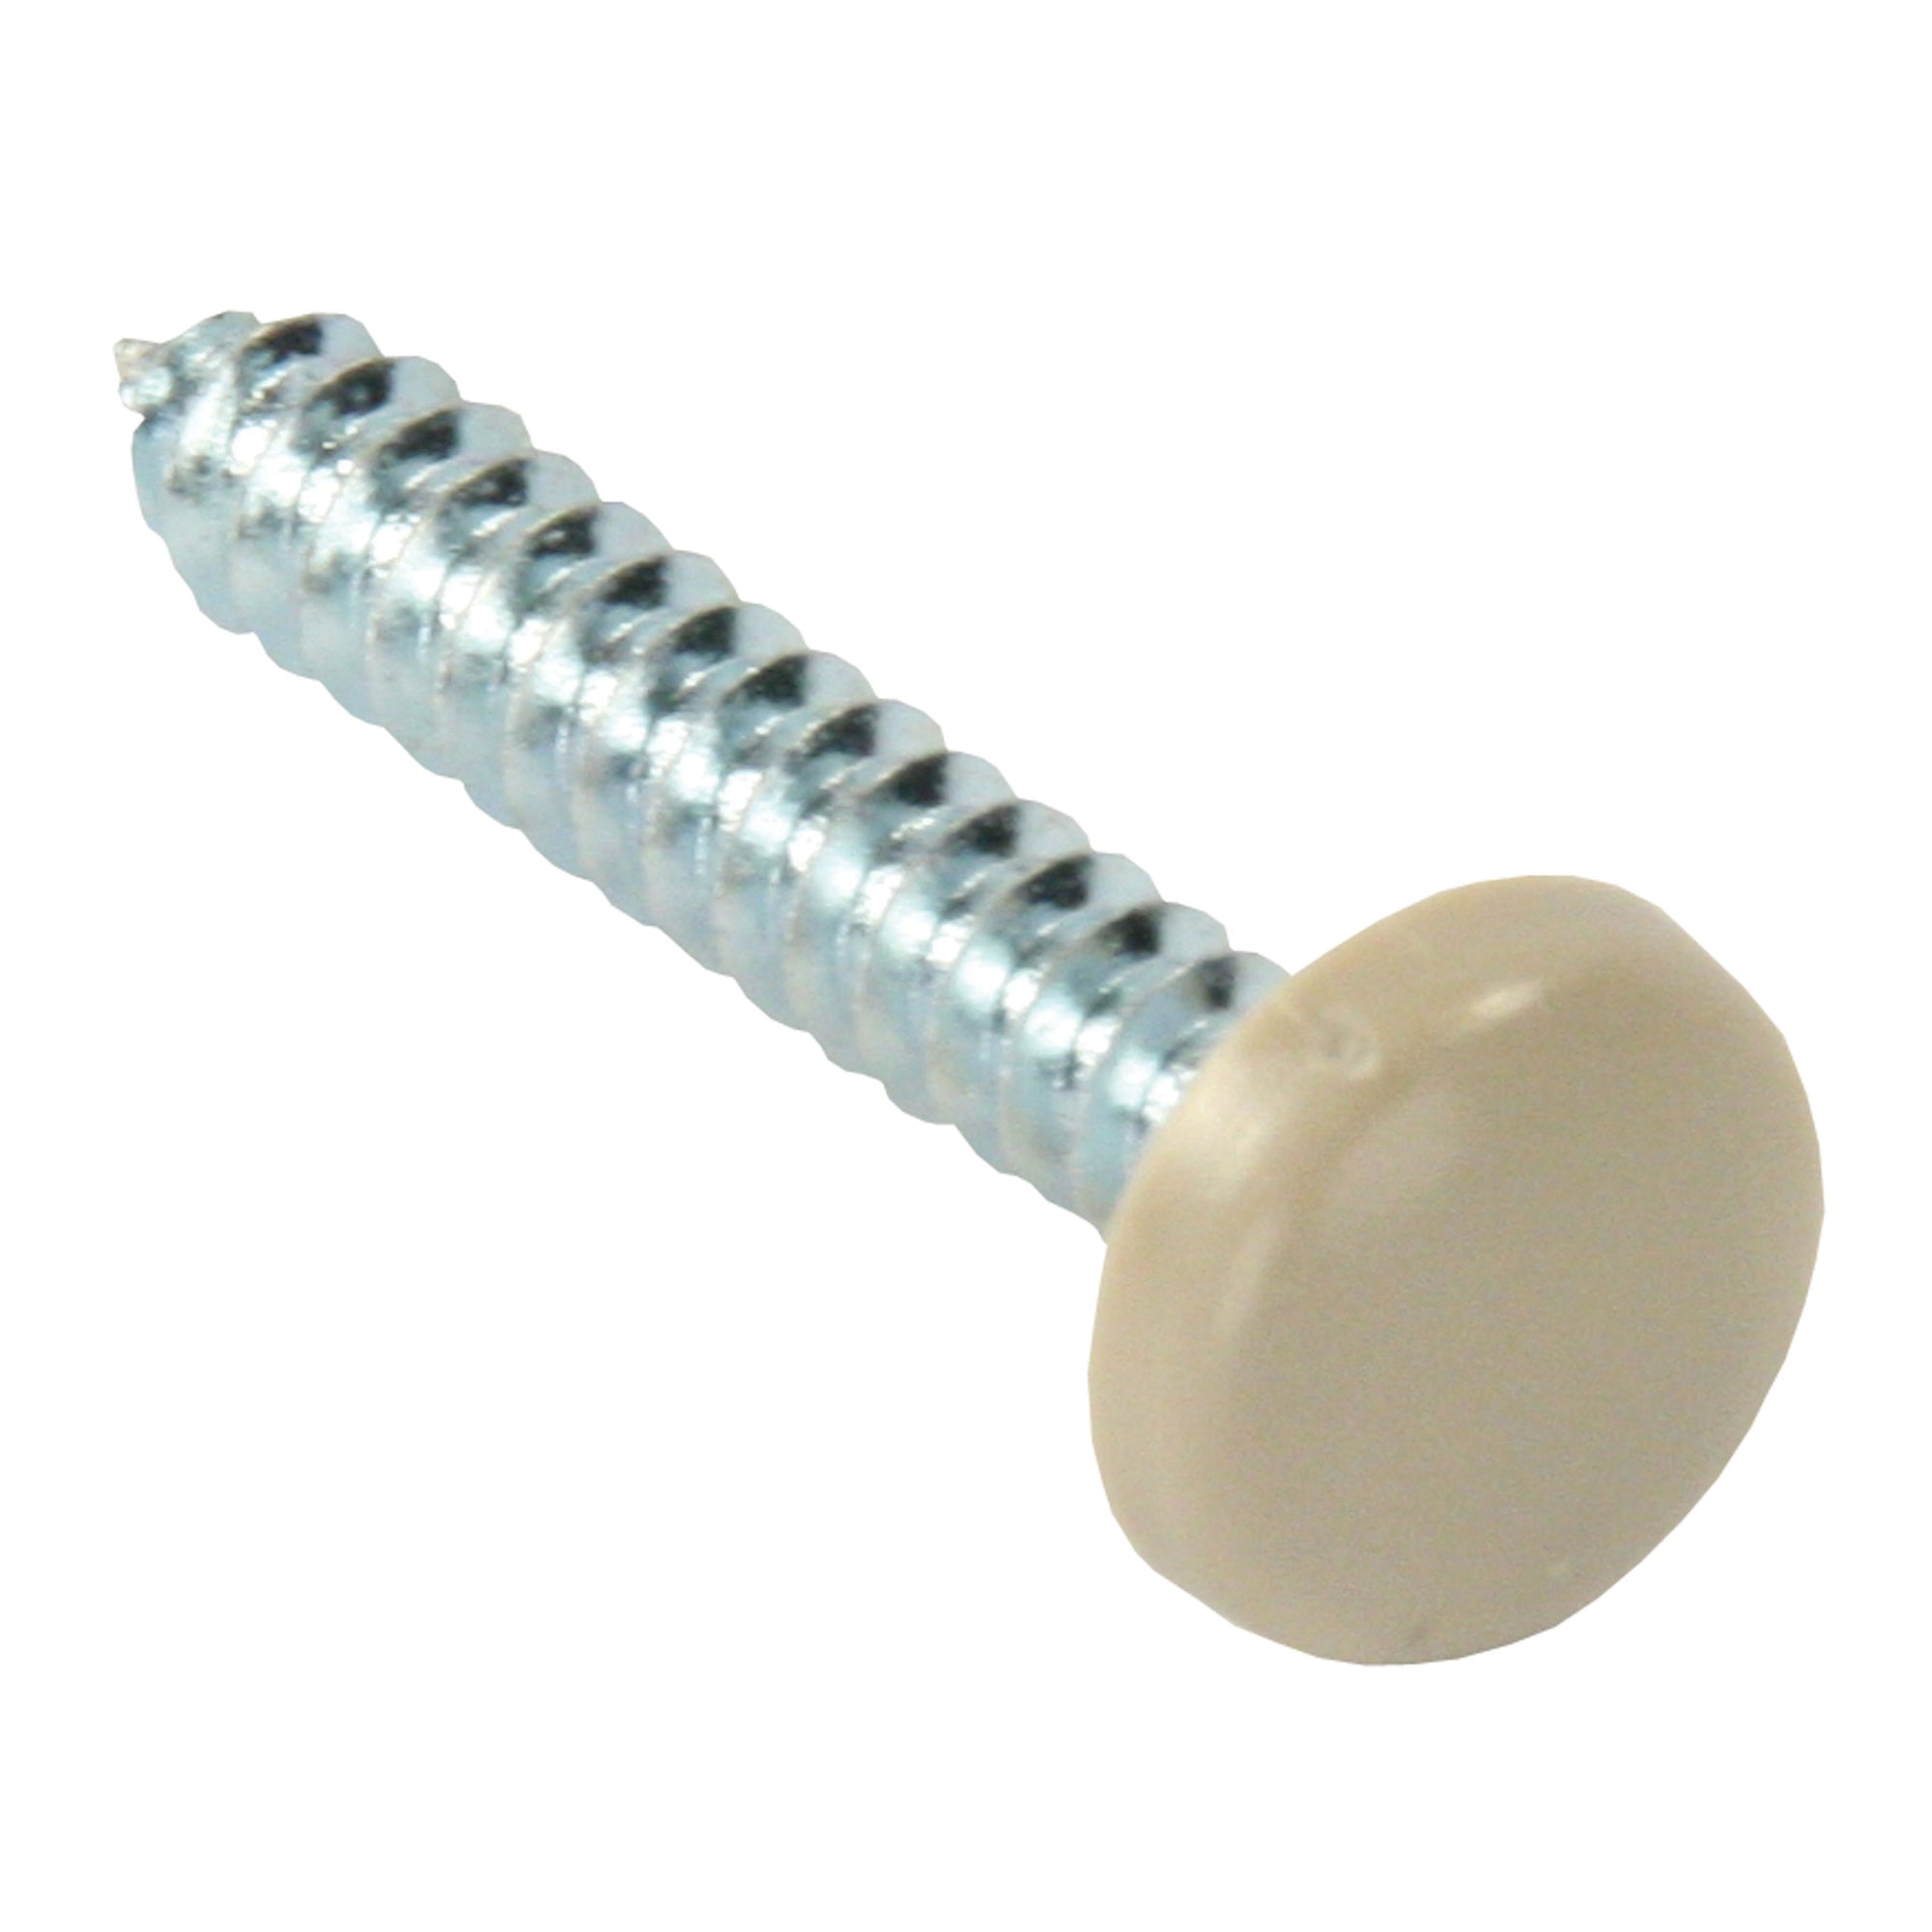 JR Products 20425 Kappet Screws with Covers, Pack of 14 - Beige